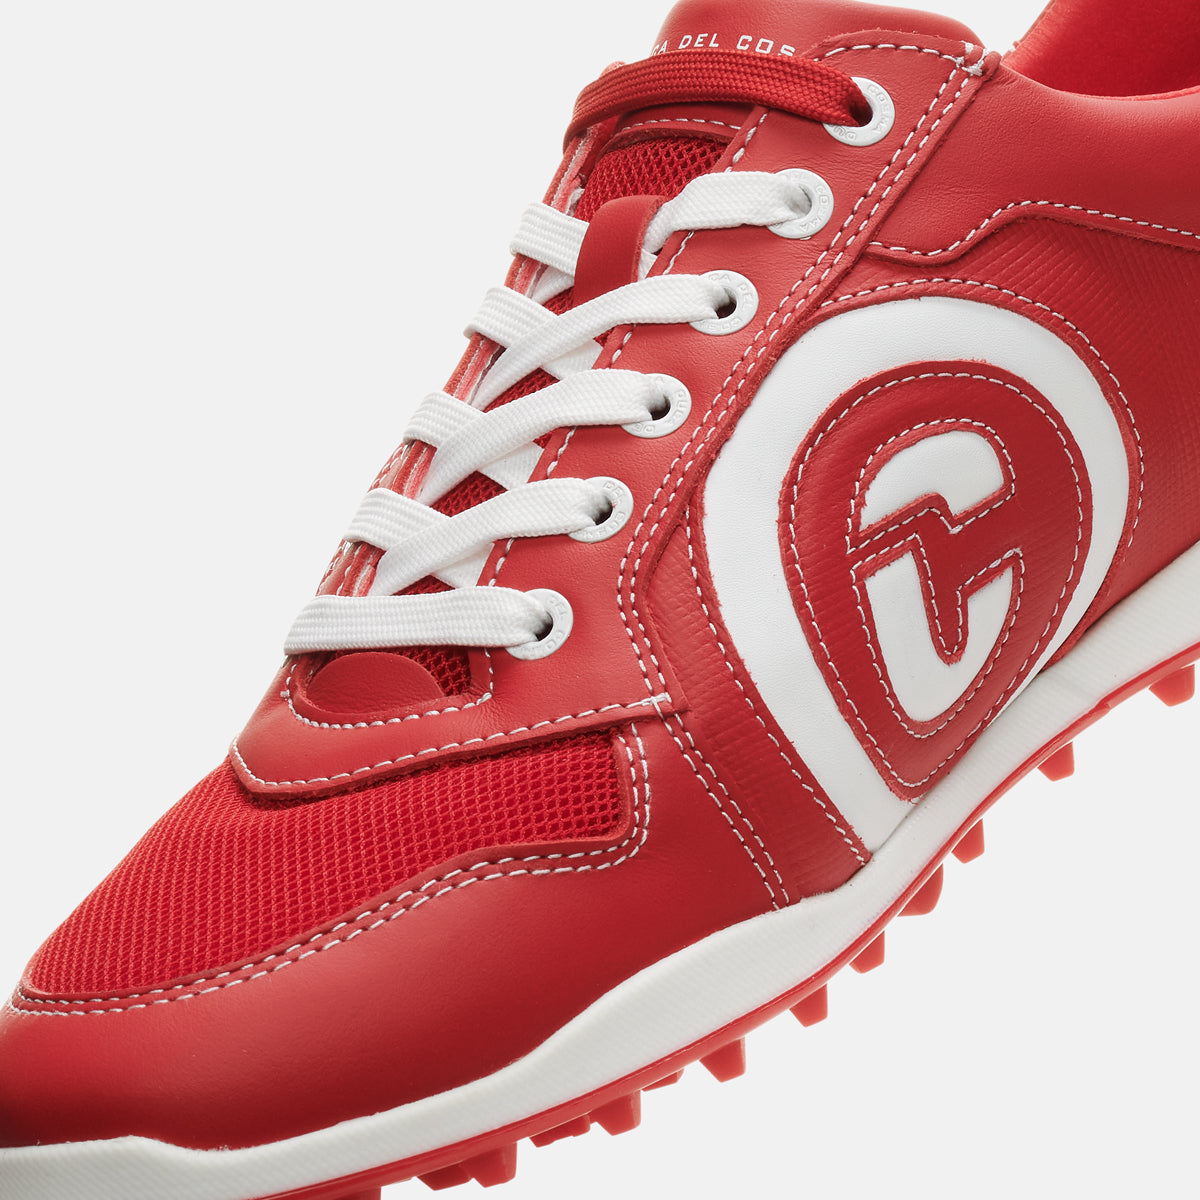 Duca del Cosma's Kuba 2.0 red golf shoe for men's handcrafted from leather and 100% waterproof